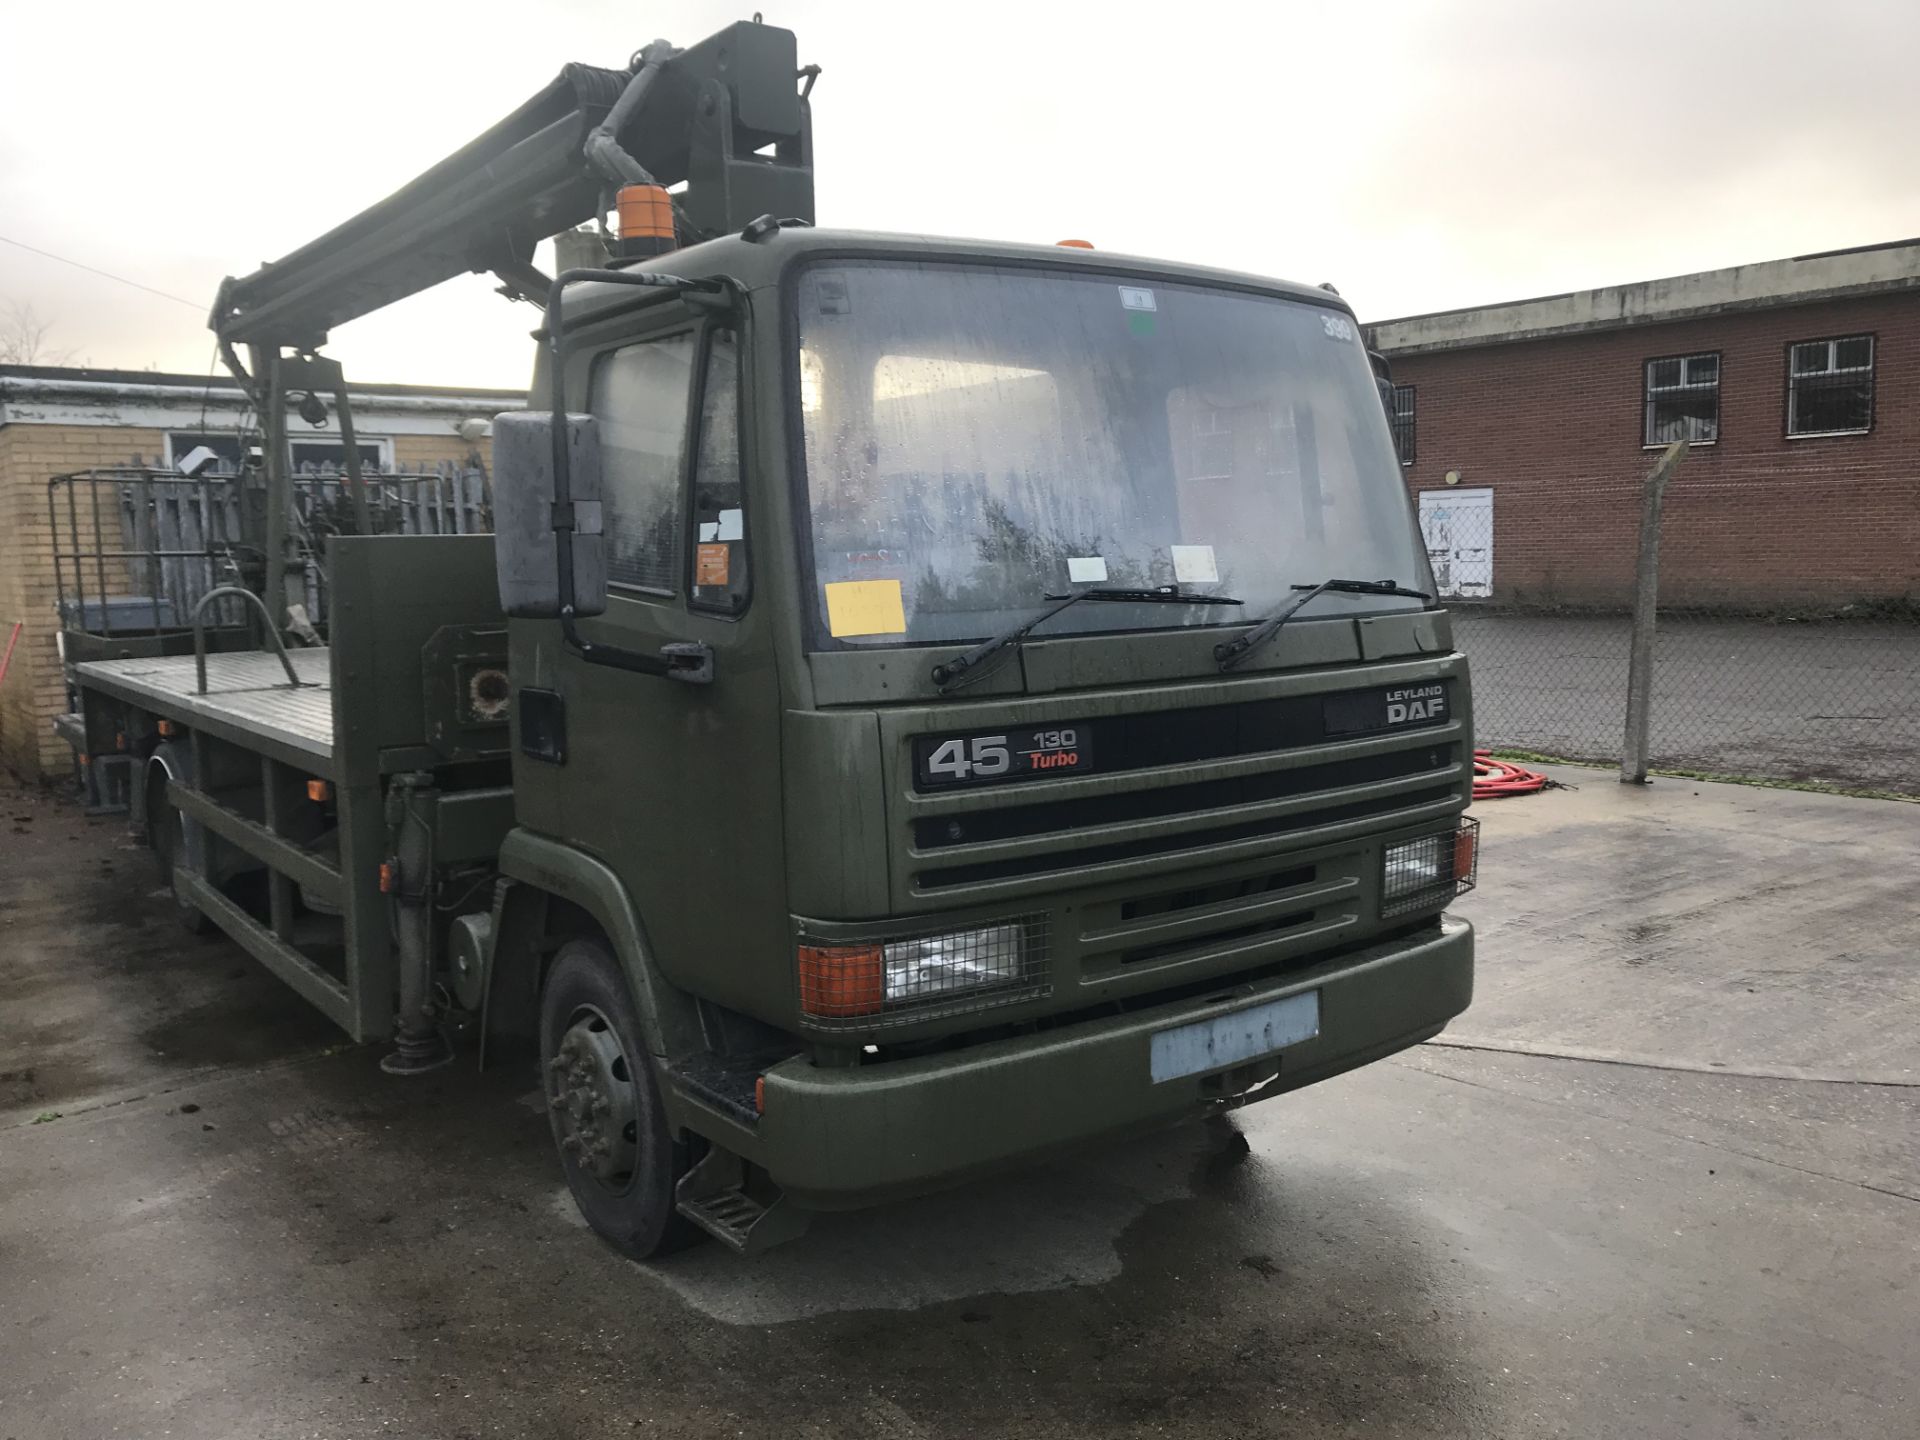 *Leyland DAF 45 130 Turbo Ex Military Cherry Picker - See Description - Image 2 of 3